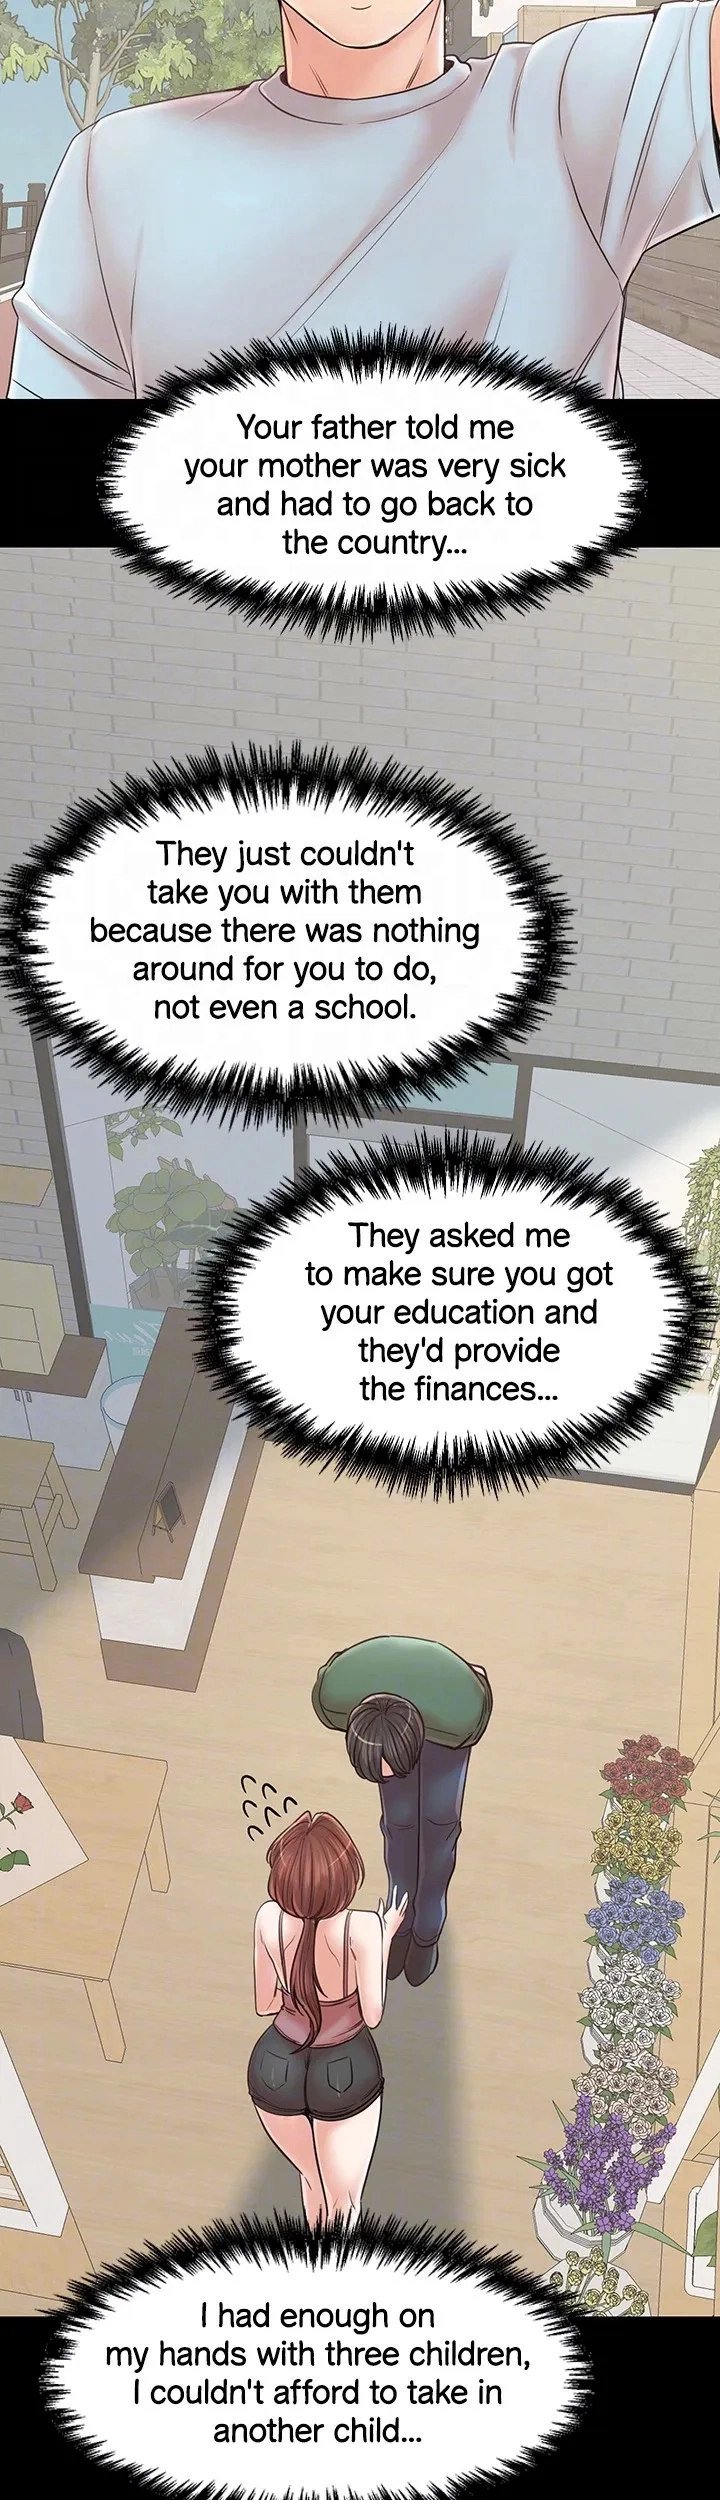 banging-mother-and-daughter-chap-33-14